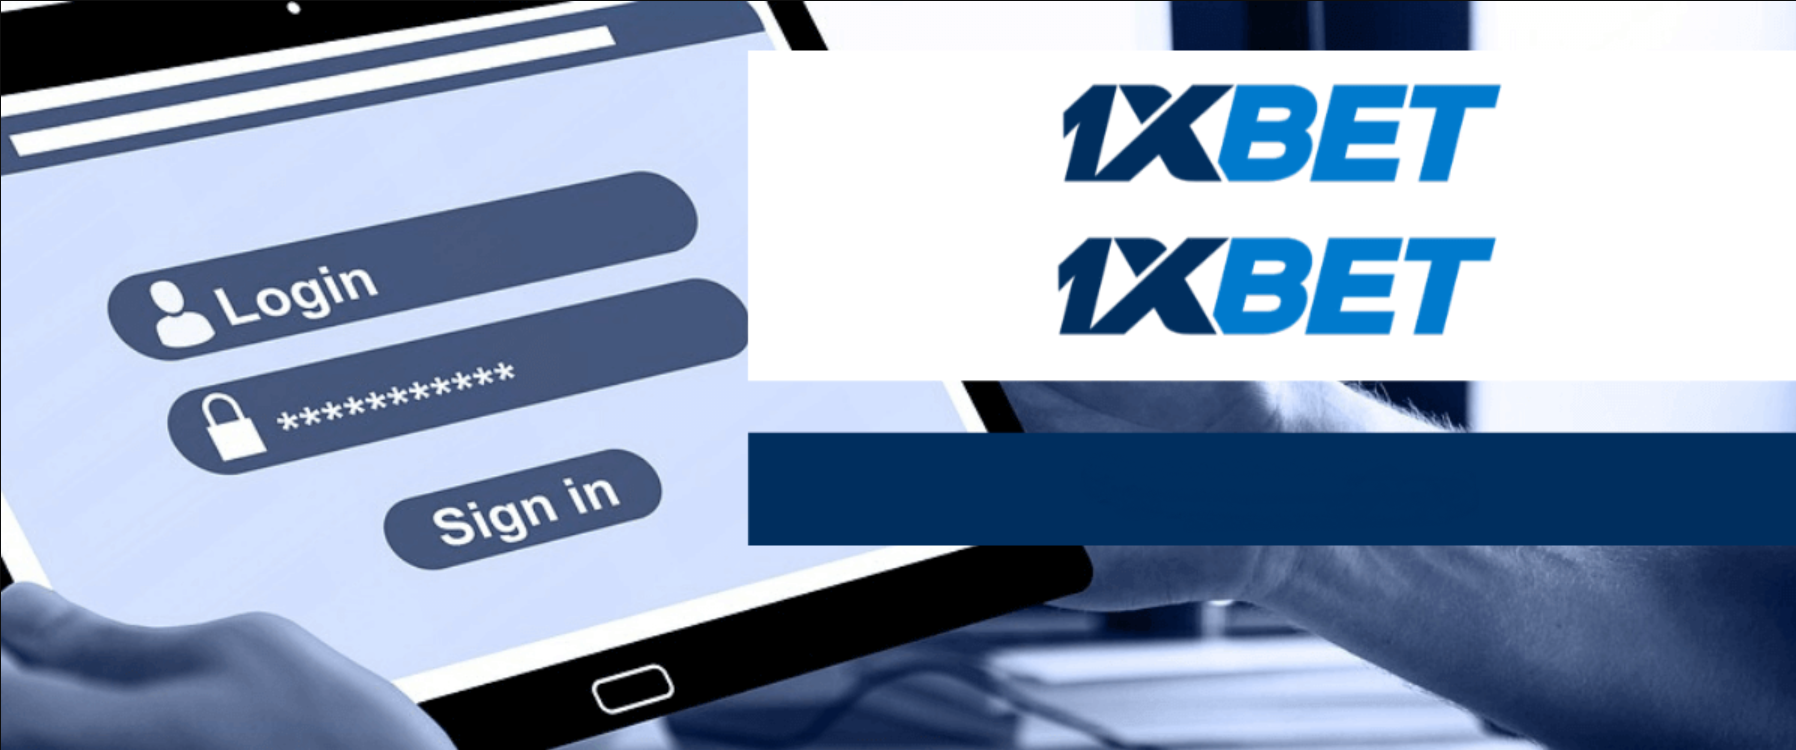 How to login 1xBet 